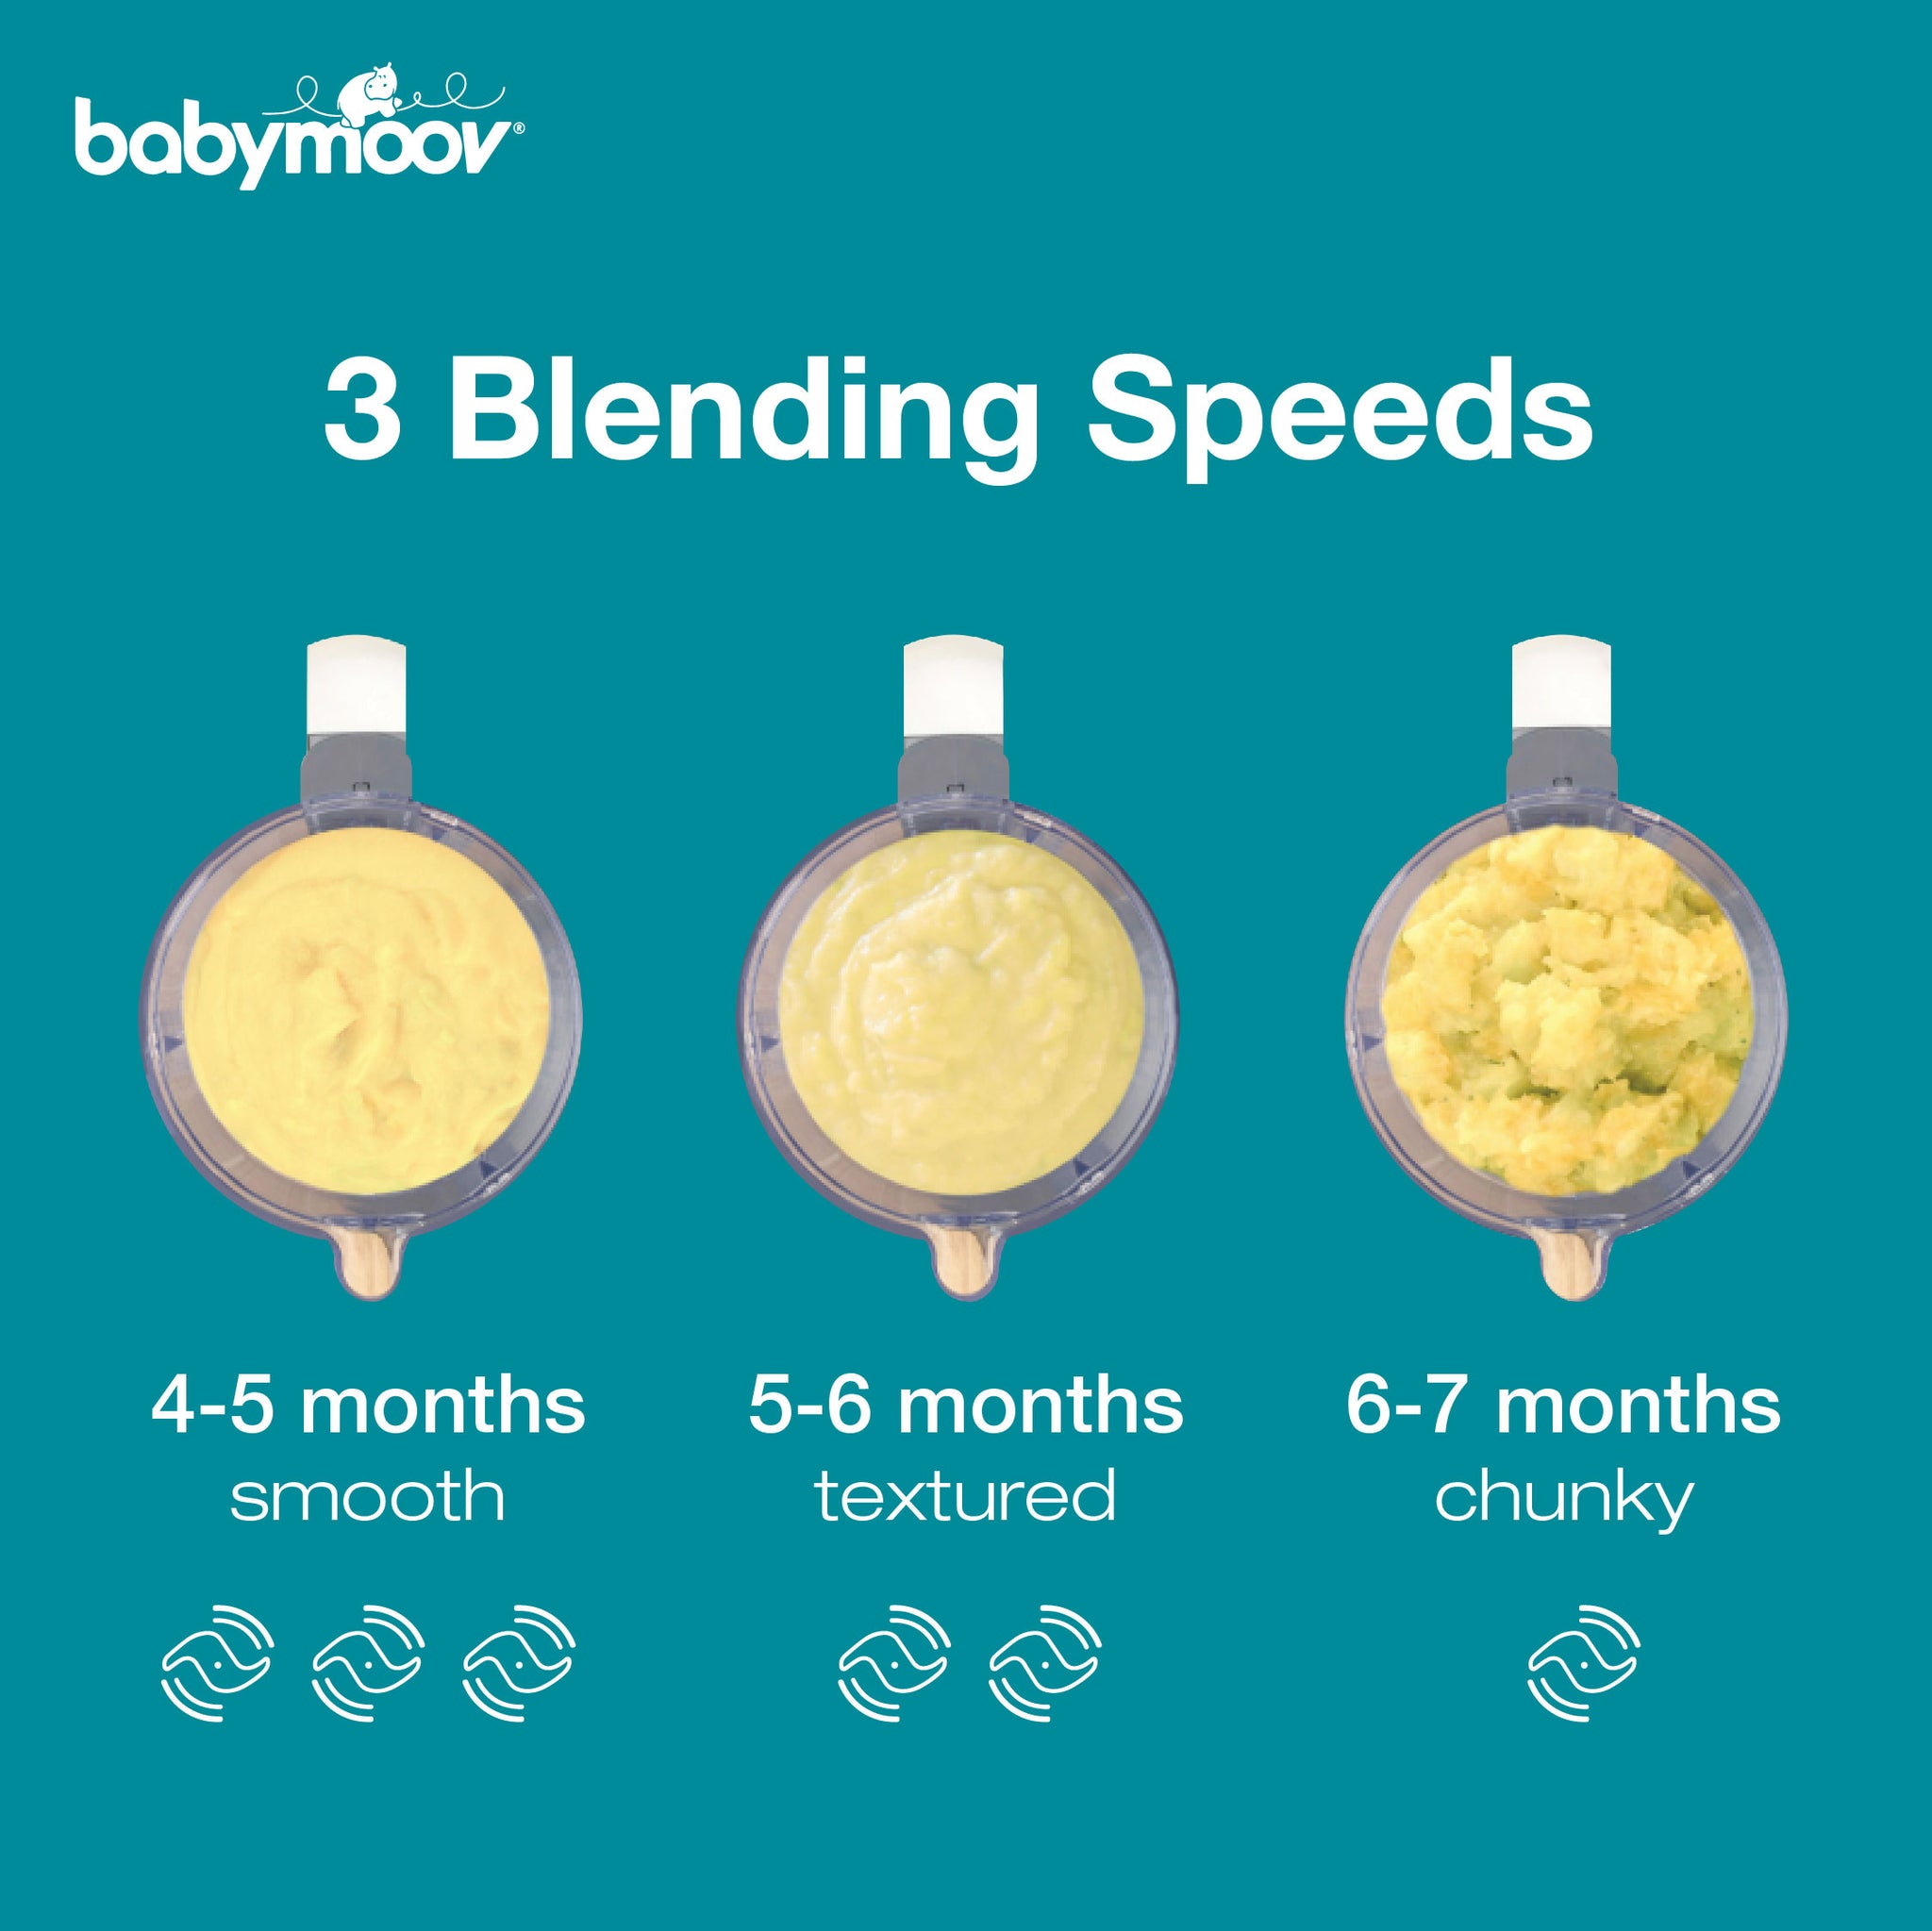 Find out more: Babymoov Nutribaby(+) - Opal Green 